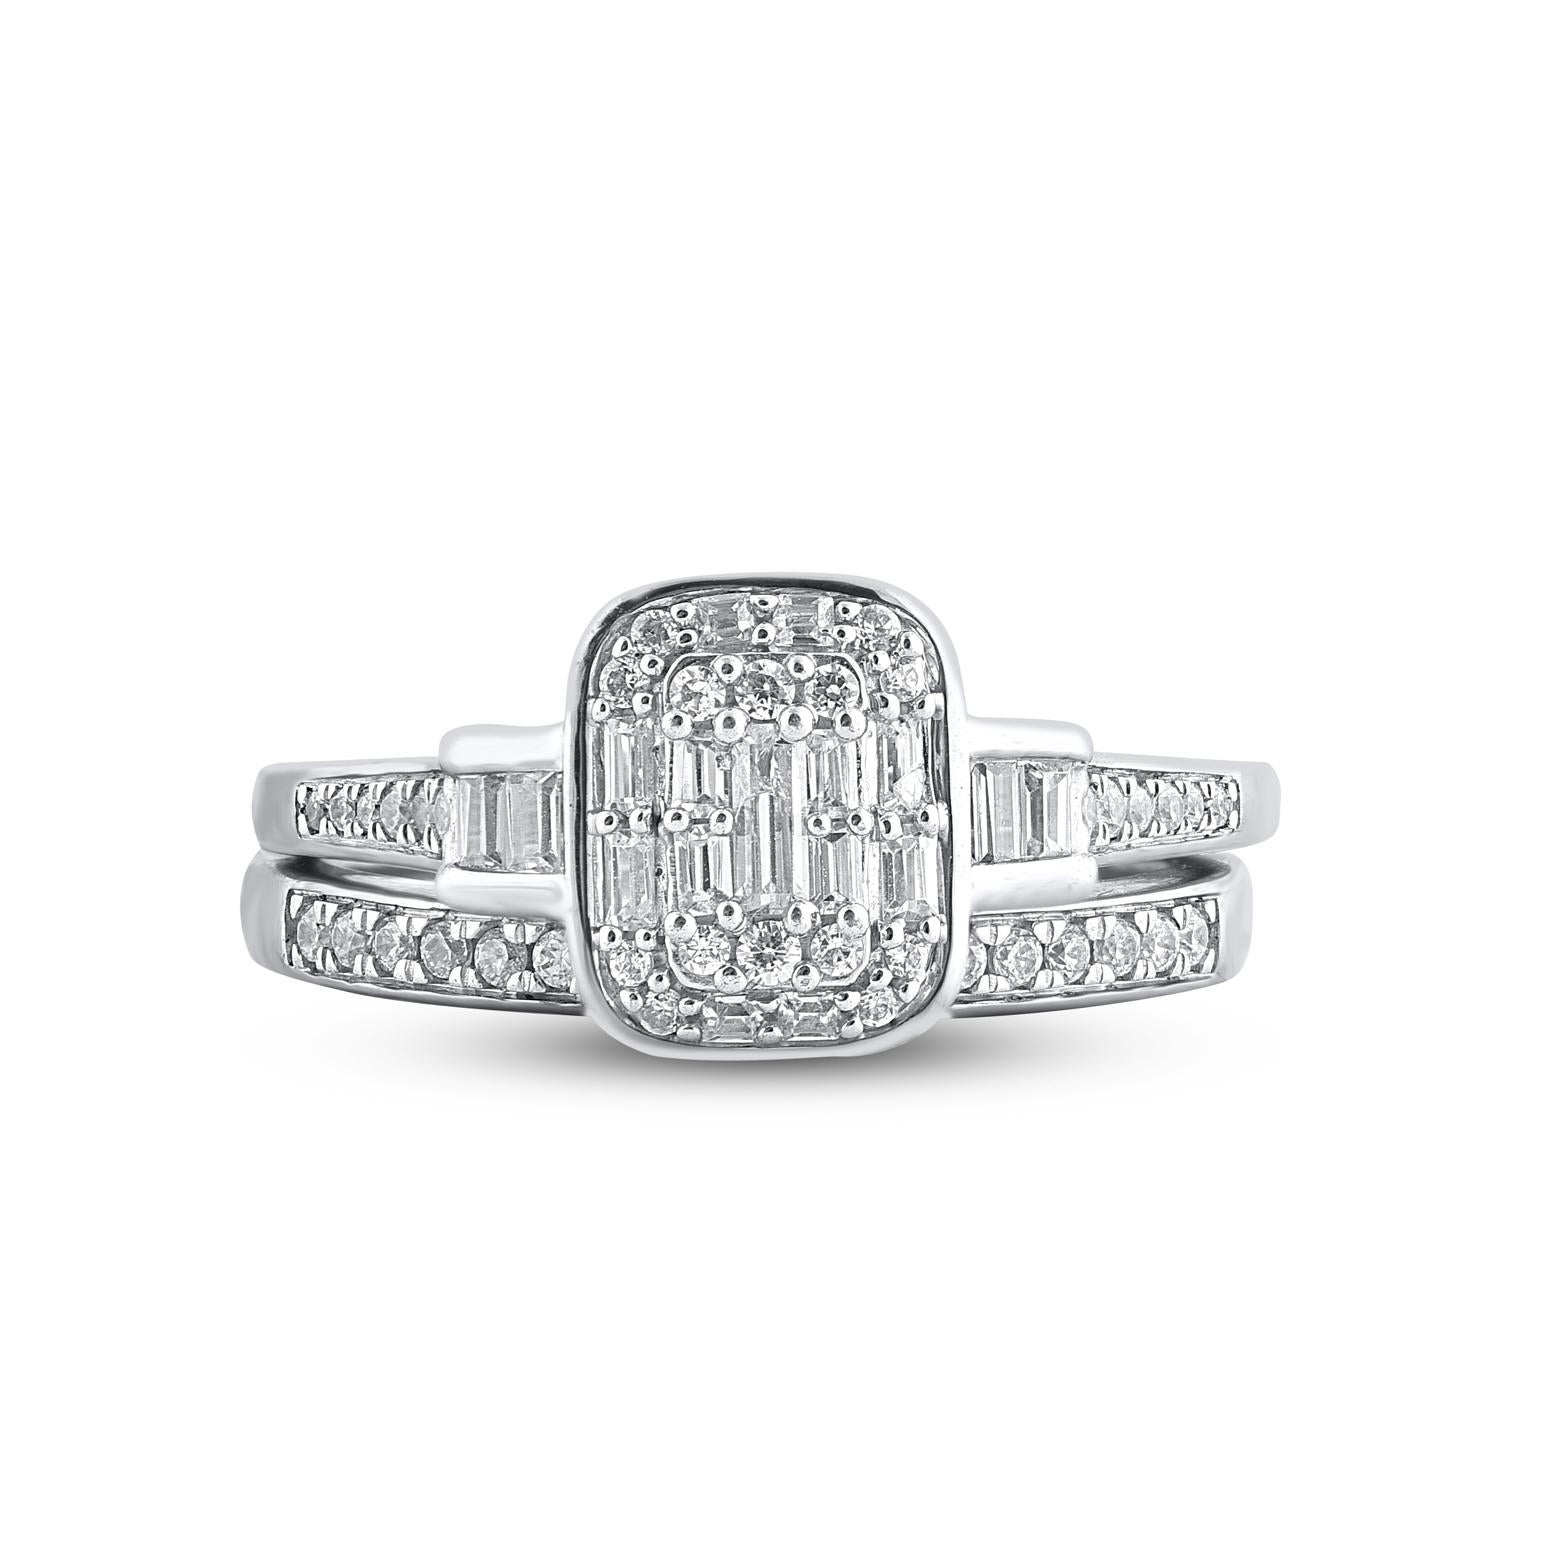 Express your love for her in the most classic way with this diamond ring set. Crafted in 14 Karat white gold. This wedding ring features a sparkling 60 brilliant cut, single cut round diamonds and baguette cut diamonds beautifully set in prong, pave